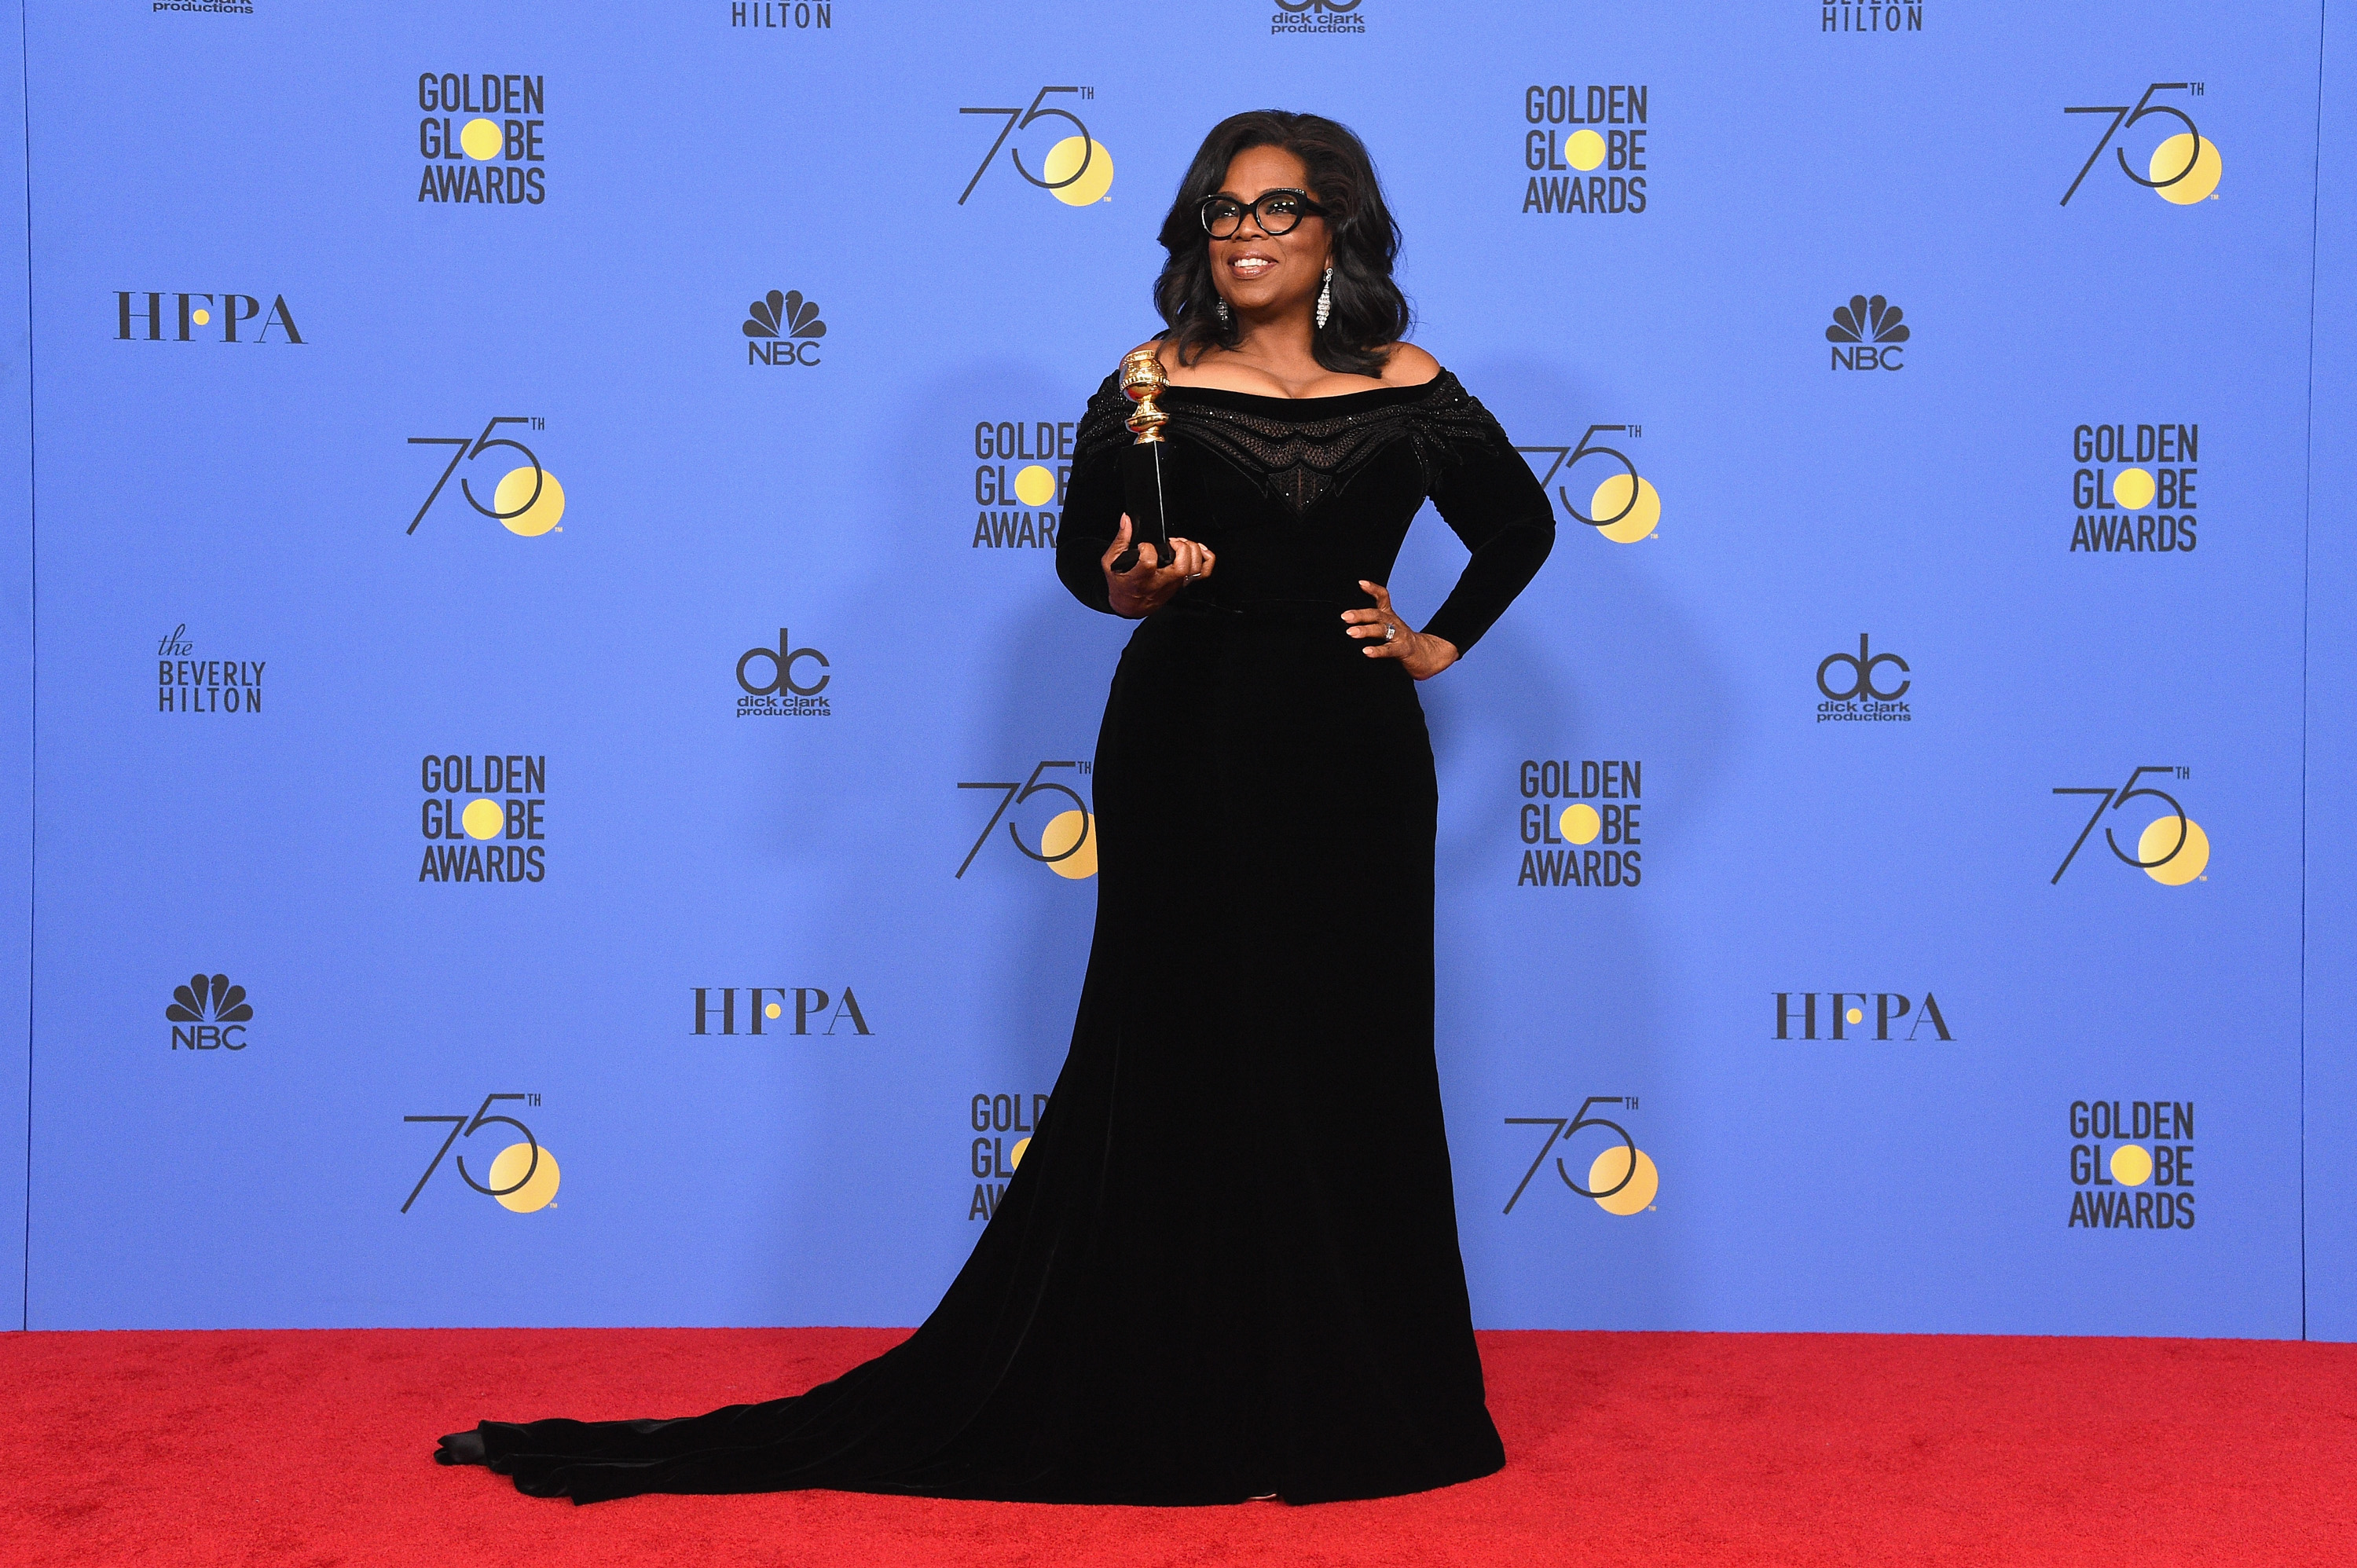 Oprah Winfrey at the 75th Annual Golden Globe Awards in Beverly Hills, 2018 | Source: Getty Images